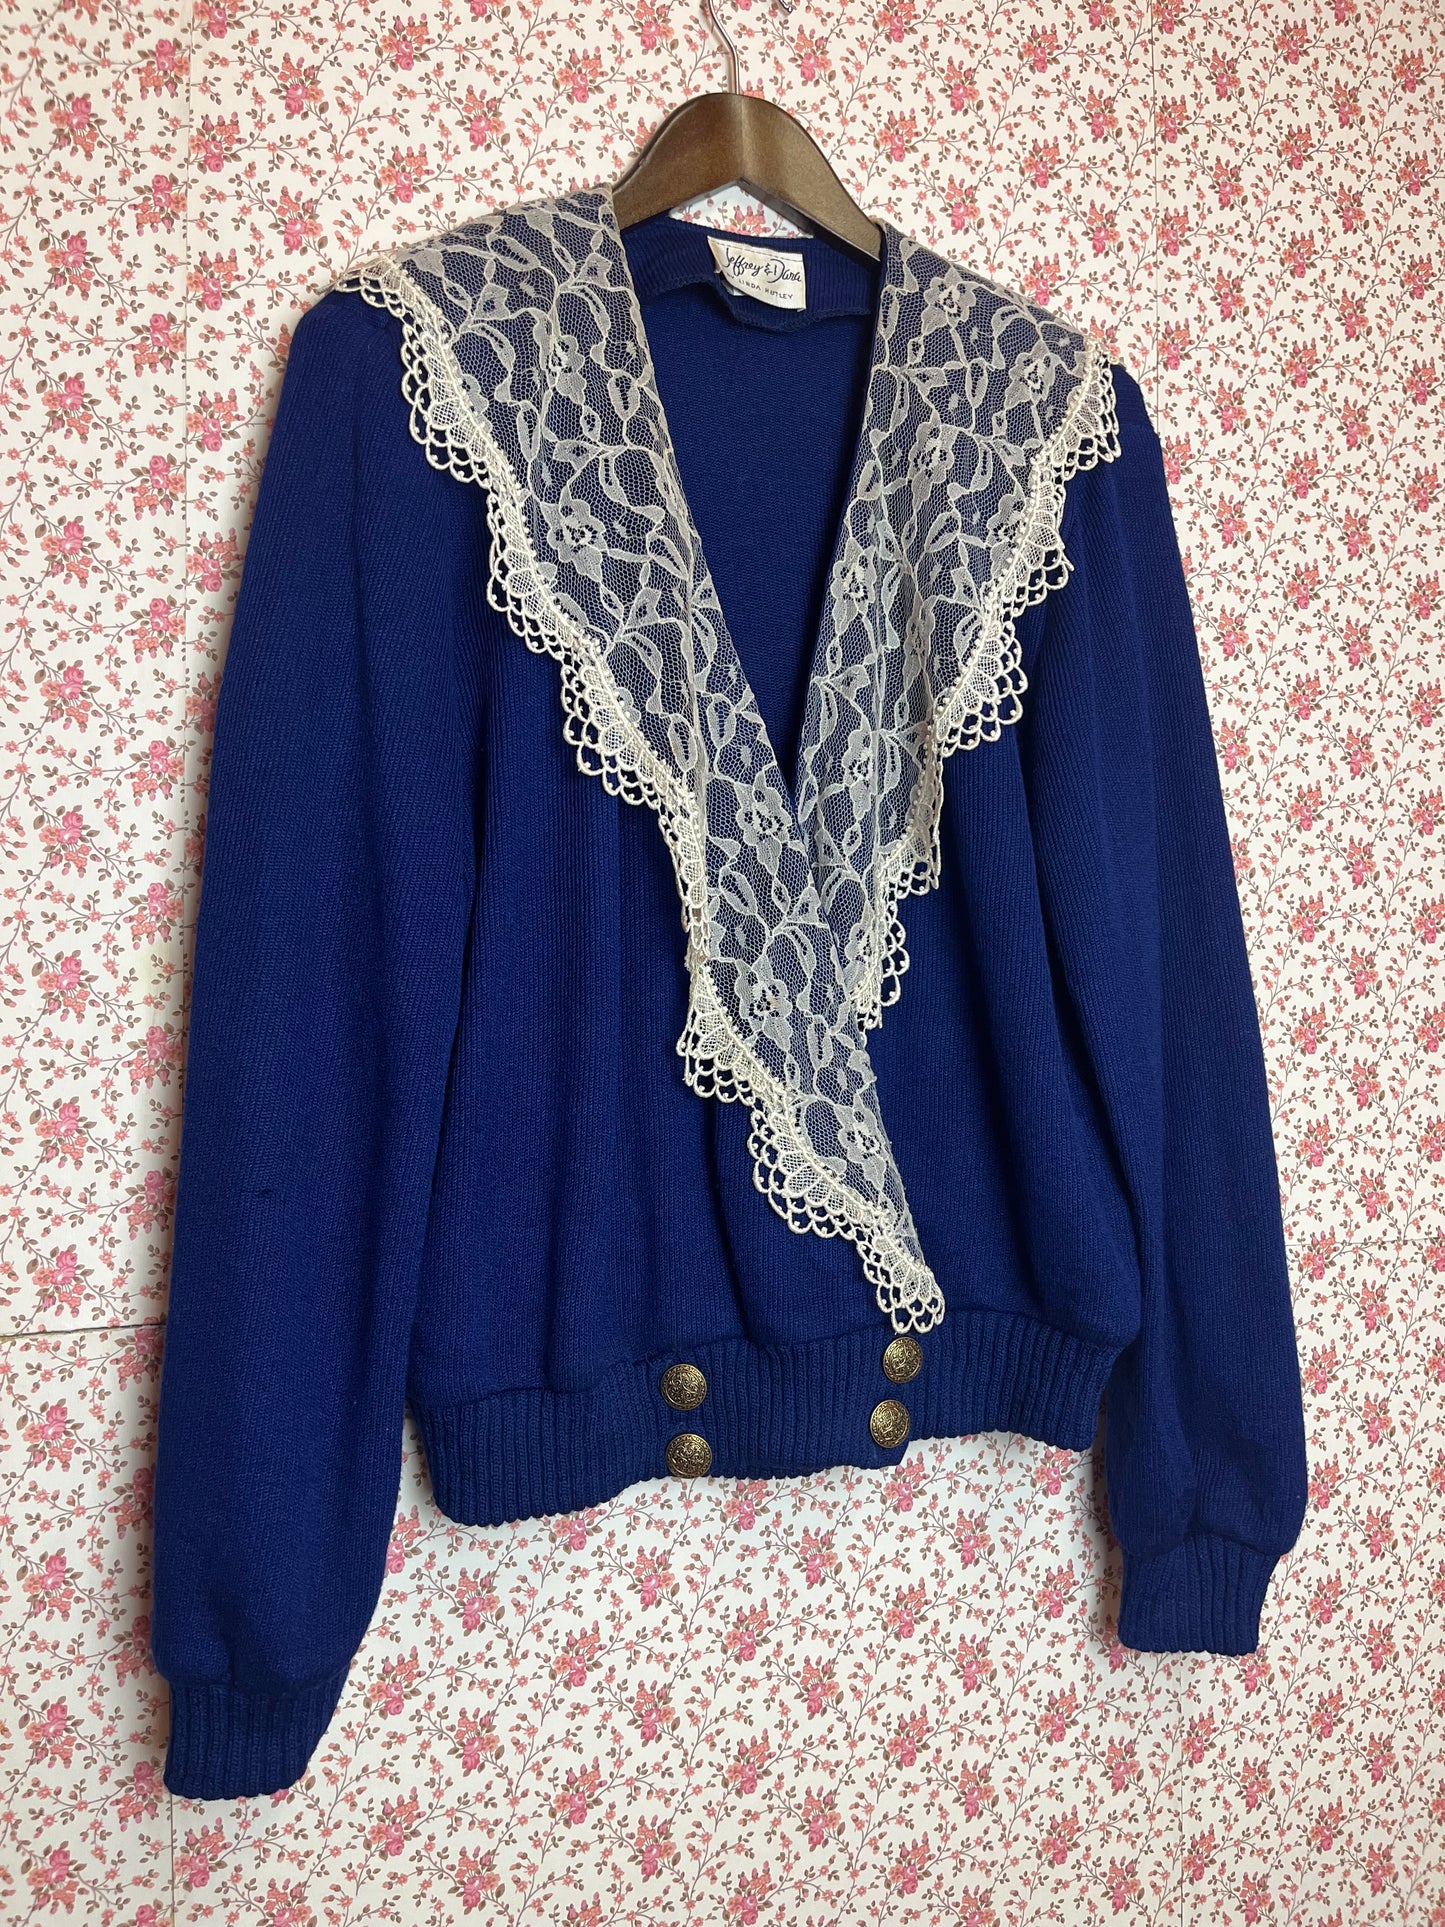 Vintage 1980s Blue Fine Knit Cardigan with Lac